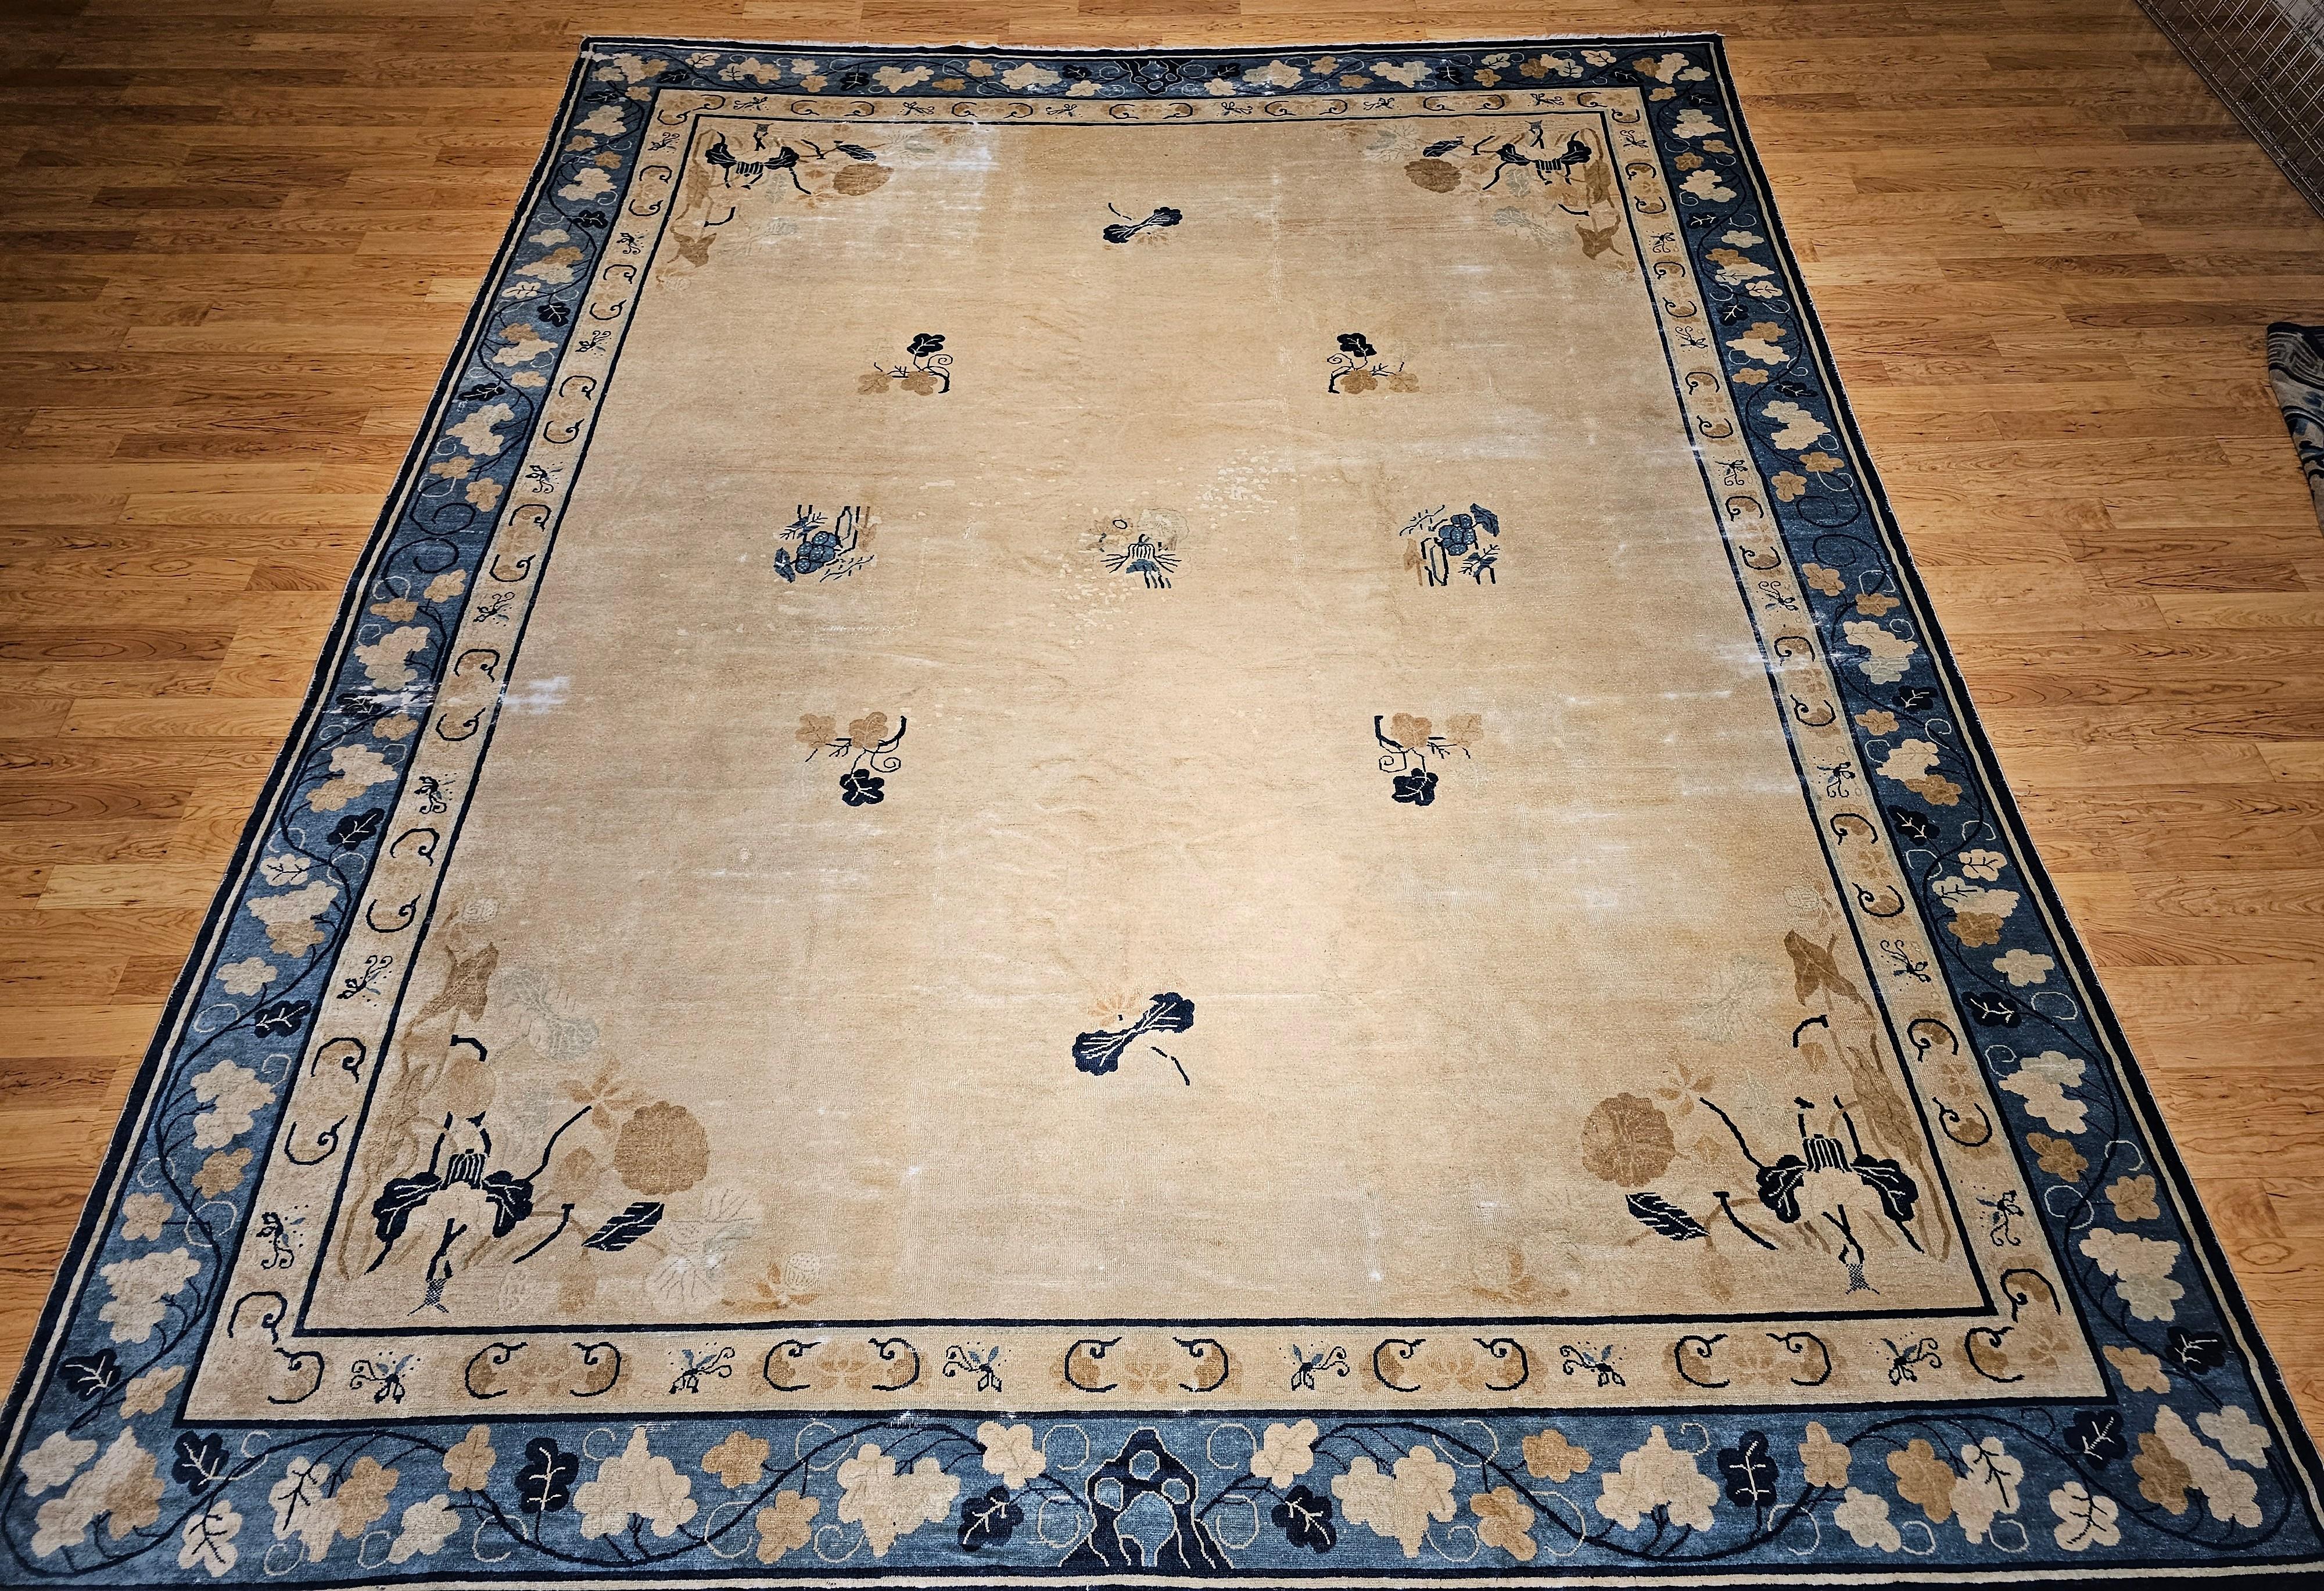 19th Century Oversized Chinese Peking Rug in Wheat, Navy, Brown, Green, Sky-Blue For Sale 12